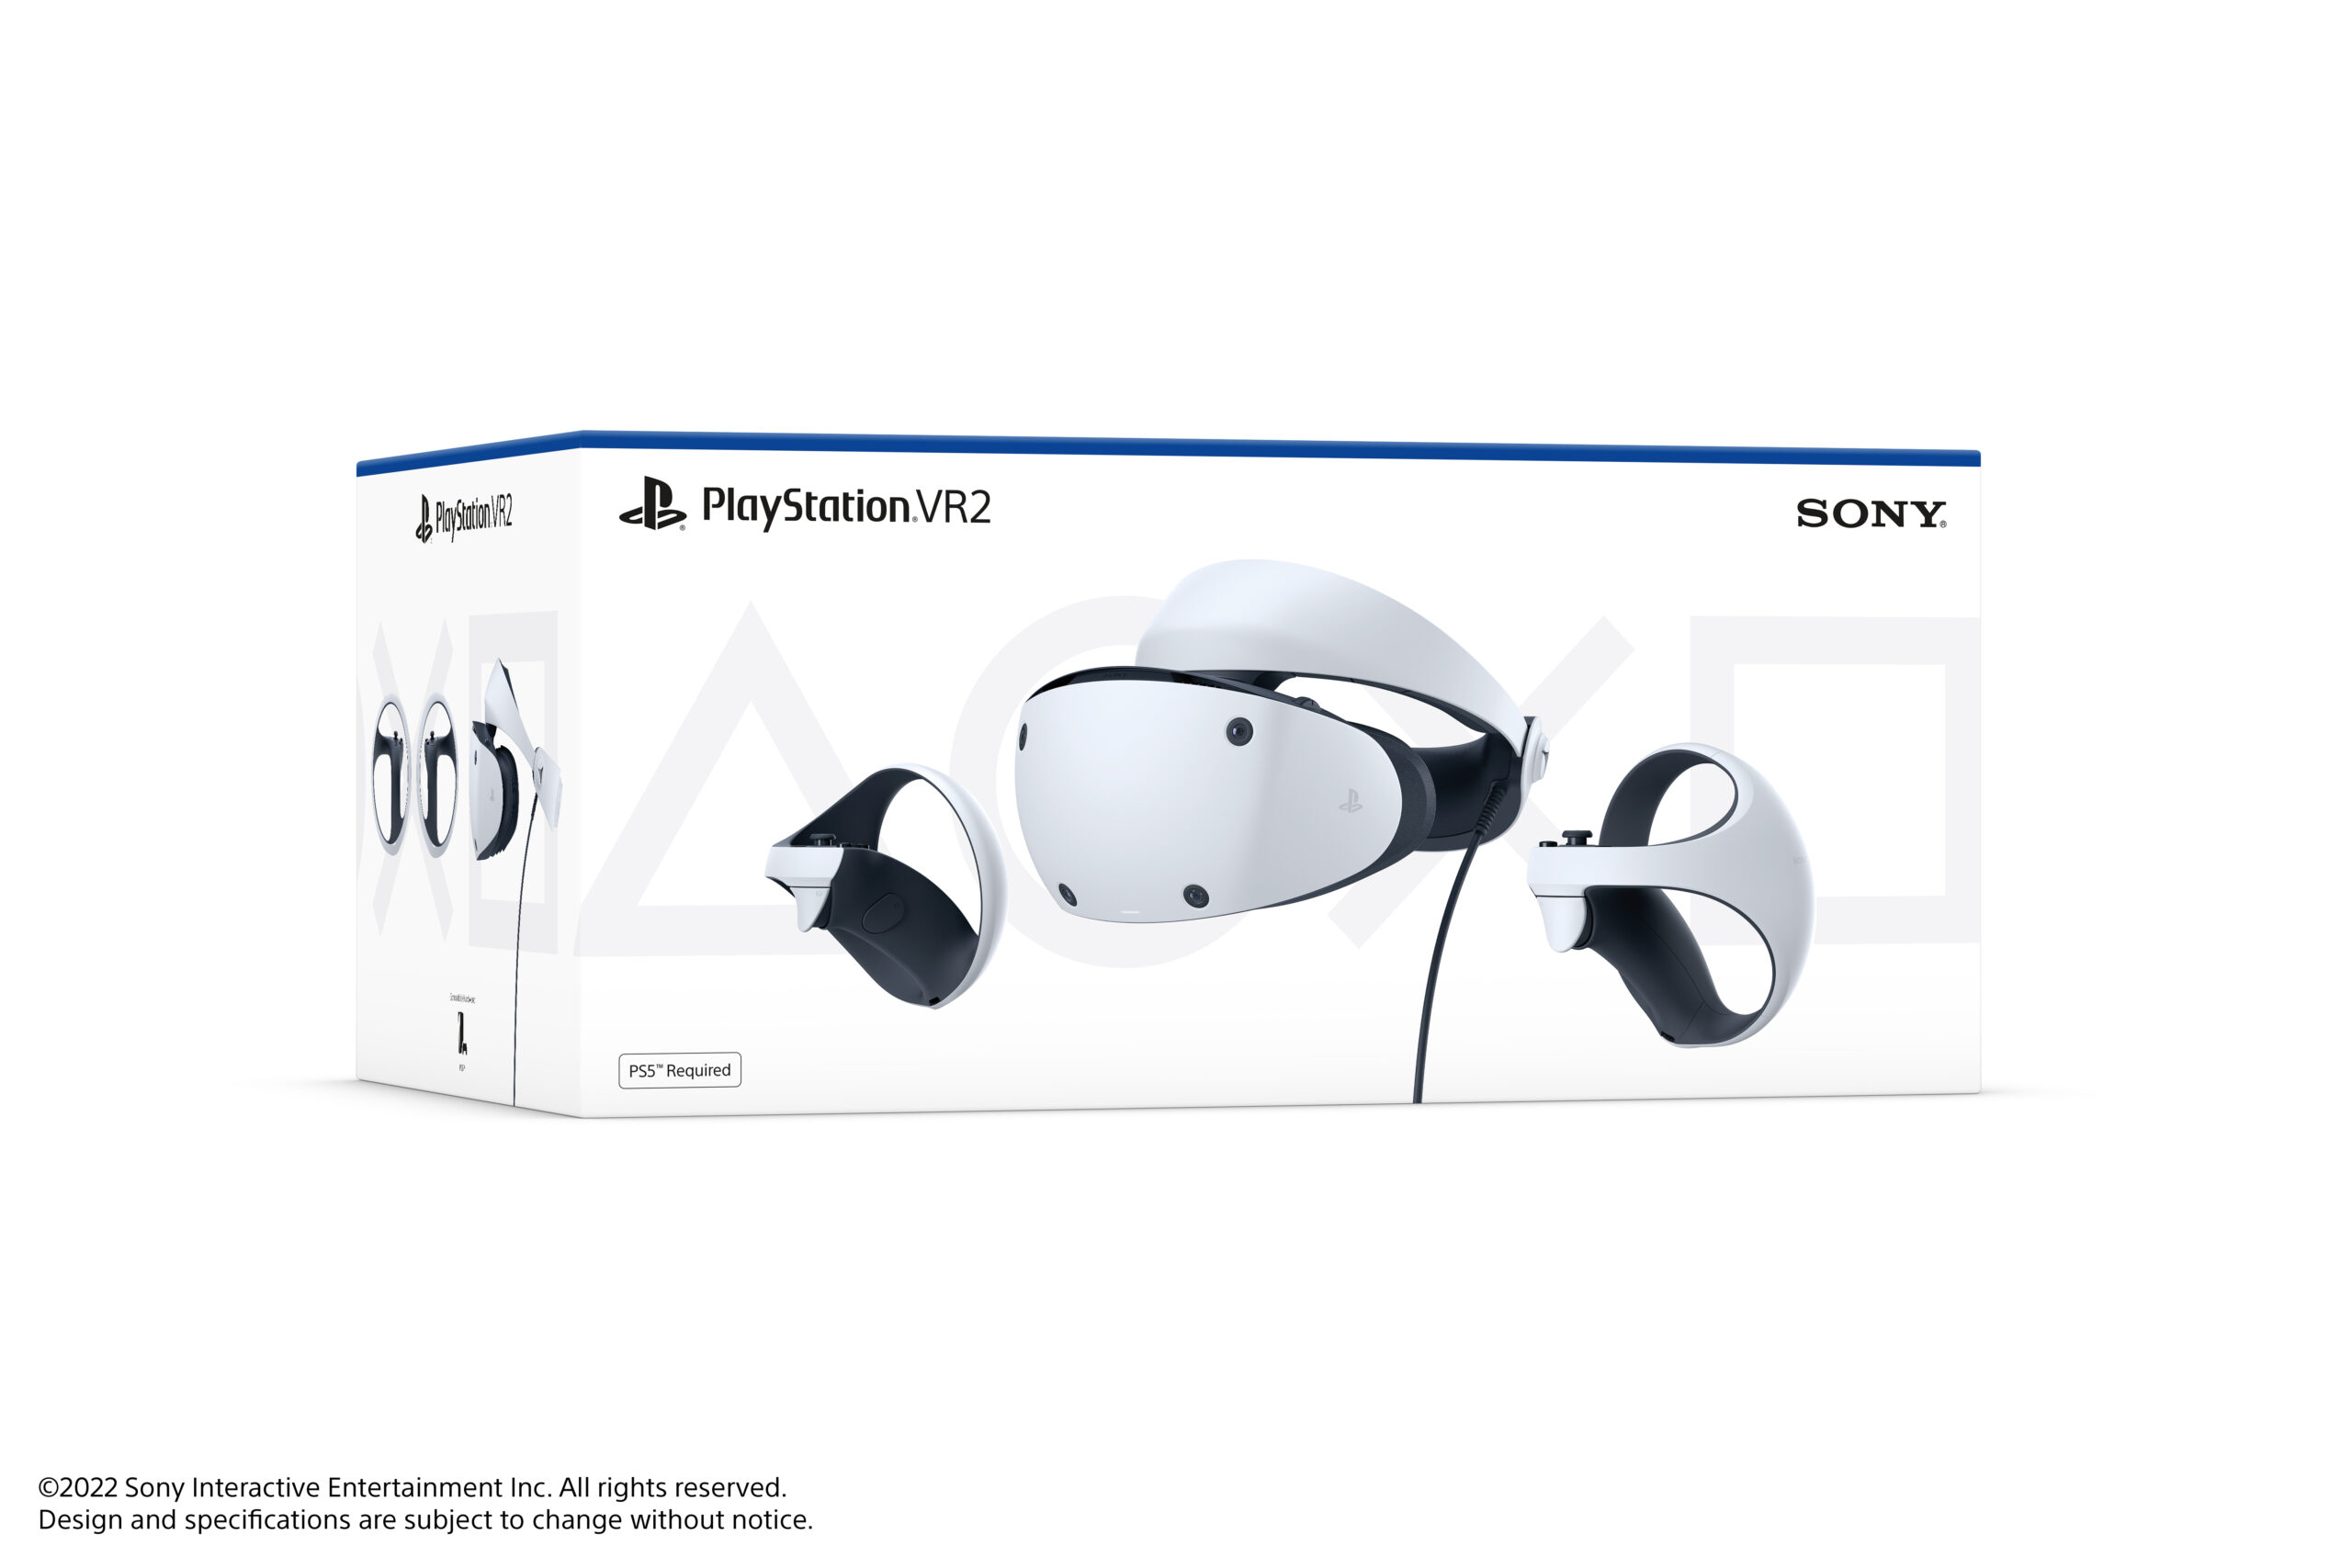 When Is The Playstation Vr Coming Out